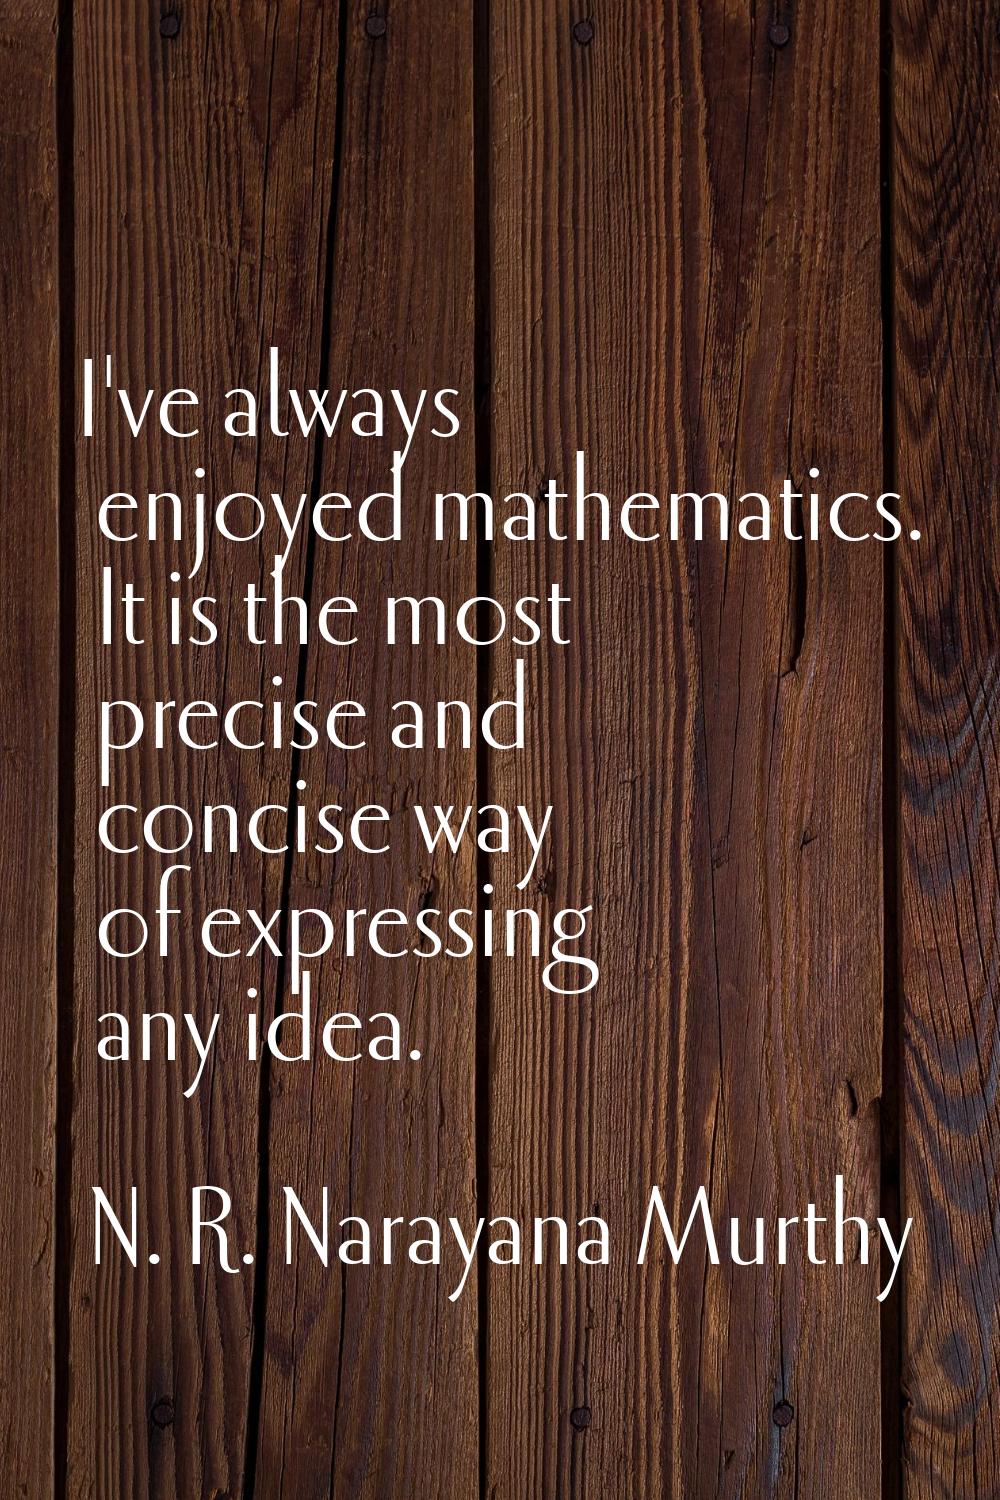 I've always enjoyed mathematics. It is the most precise and concise way of expressing any idea.